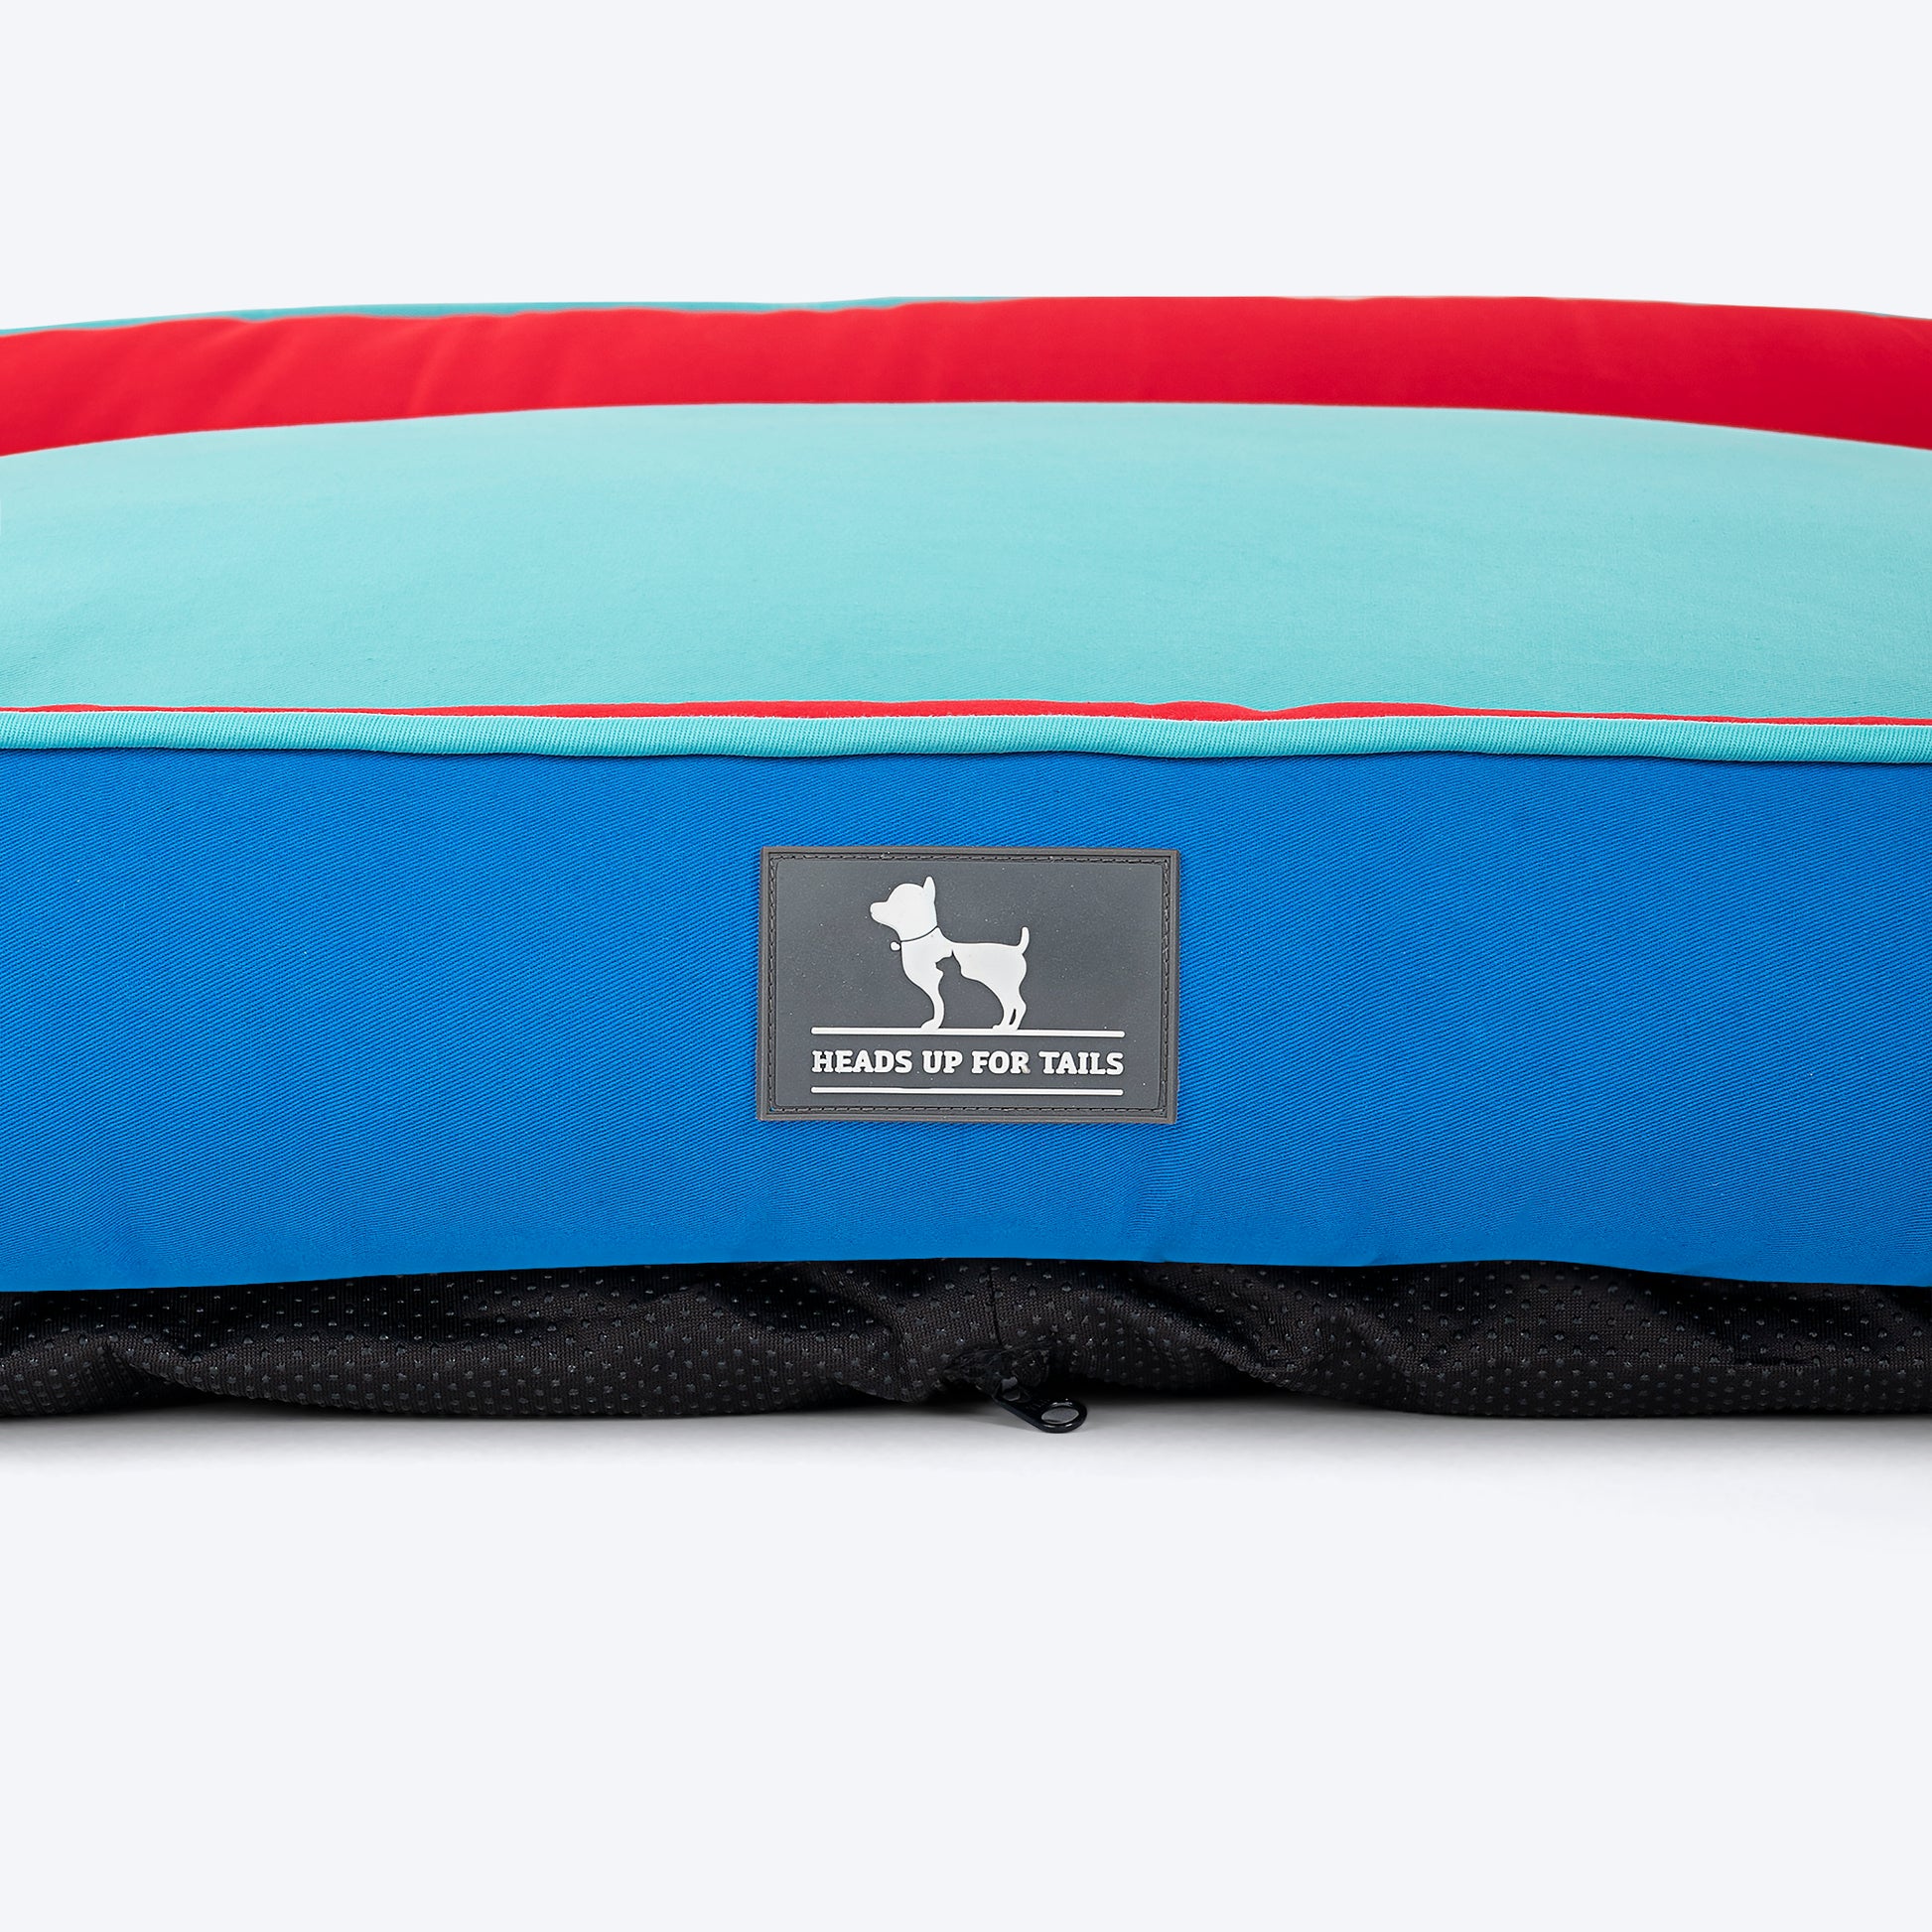 HUFT Classic Lounger Dog Bed - Red & Imperial Blue - Heads Up For Tails